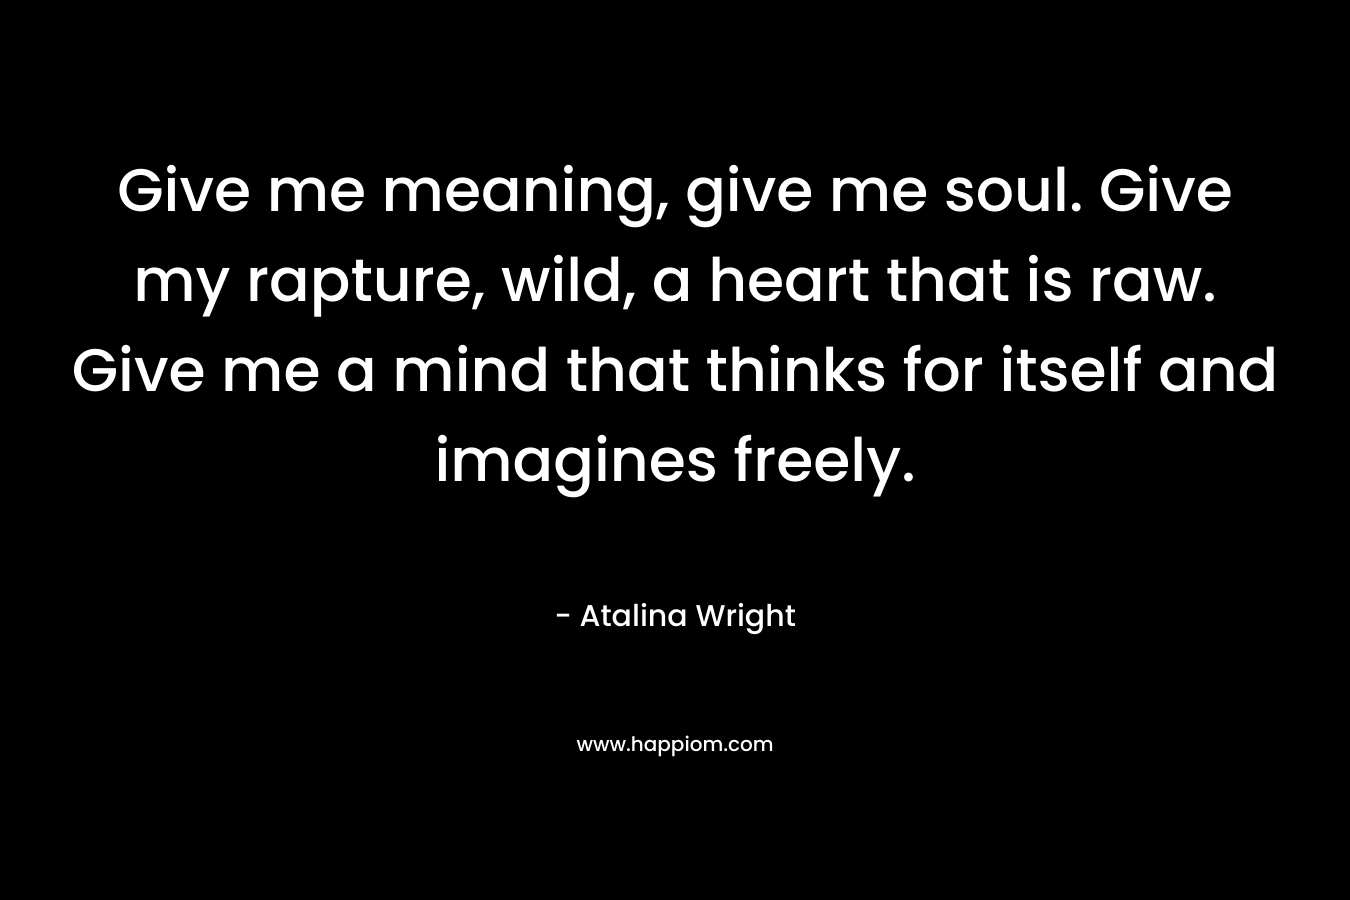 Give me meaning, give me soul. Give my rapture, wild, a heart that is raw. Give me a mind that thinks for itself and imagines freely.